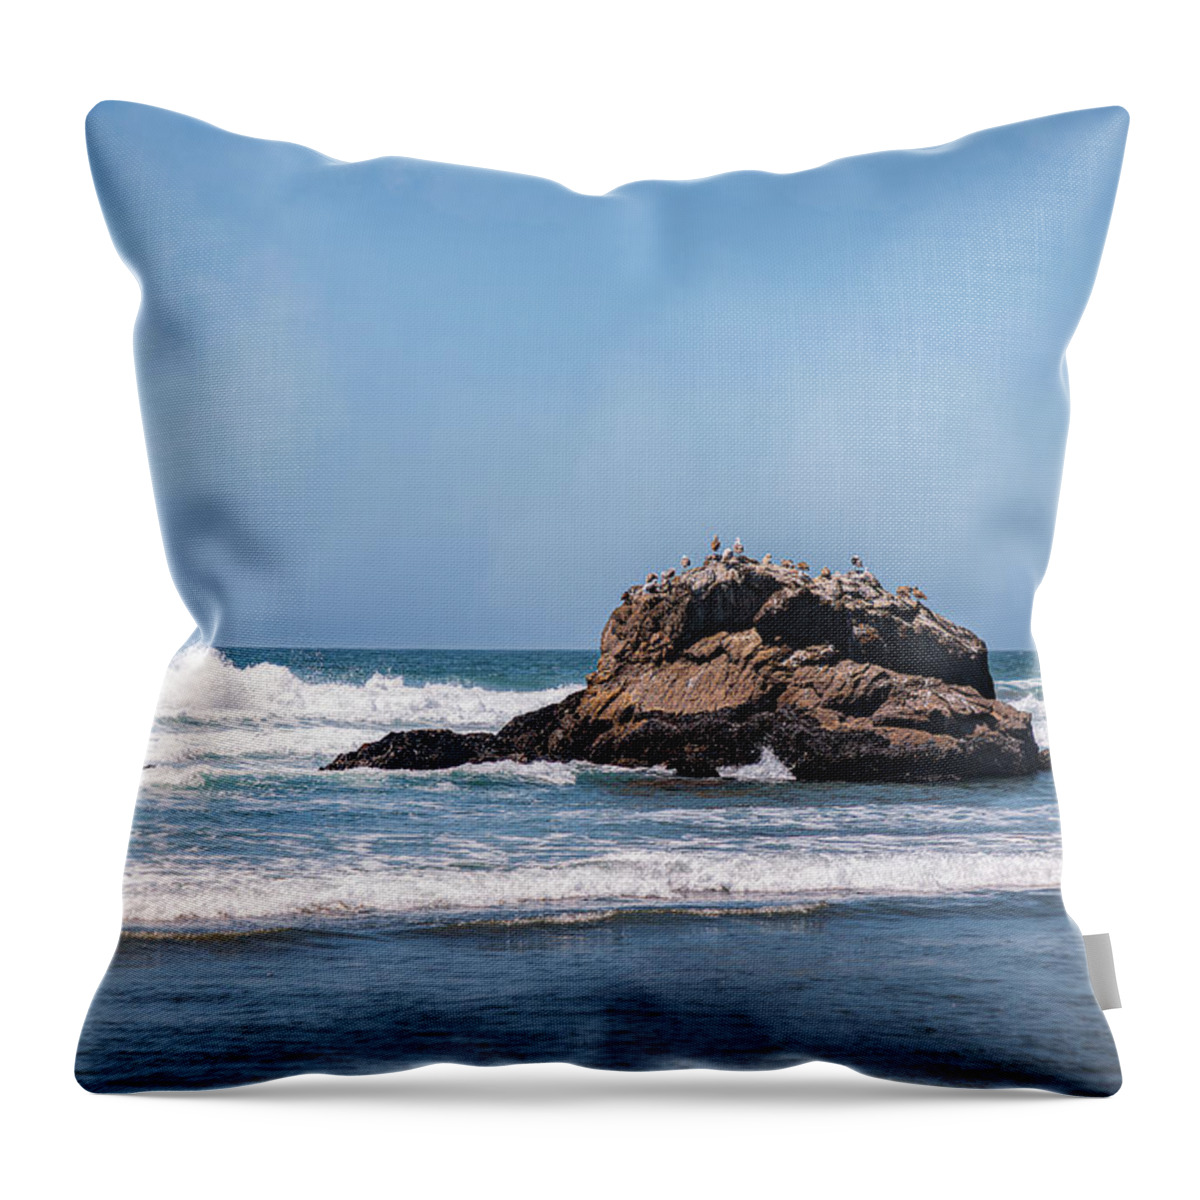 2020 Throw Pillow featuring the photograph Seagulls At The Beach by Ant Pruitt